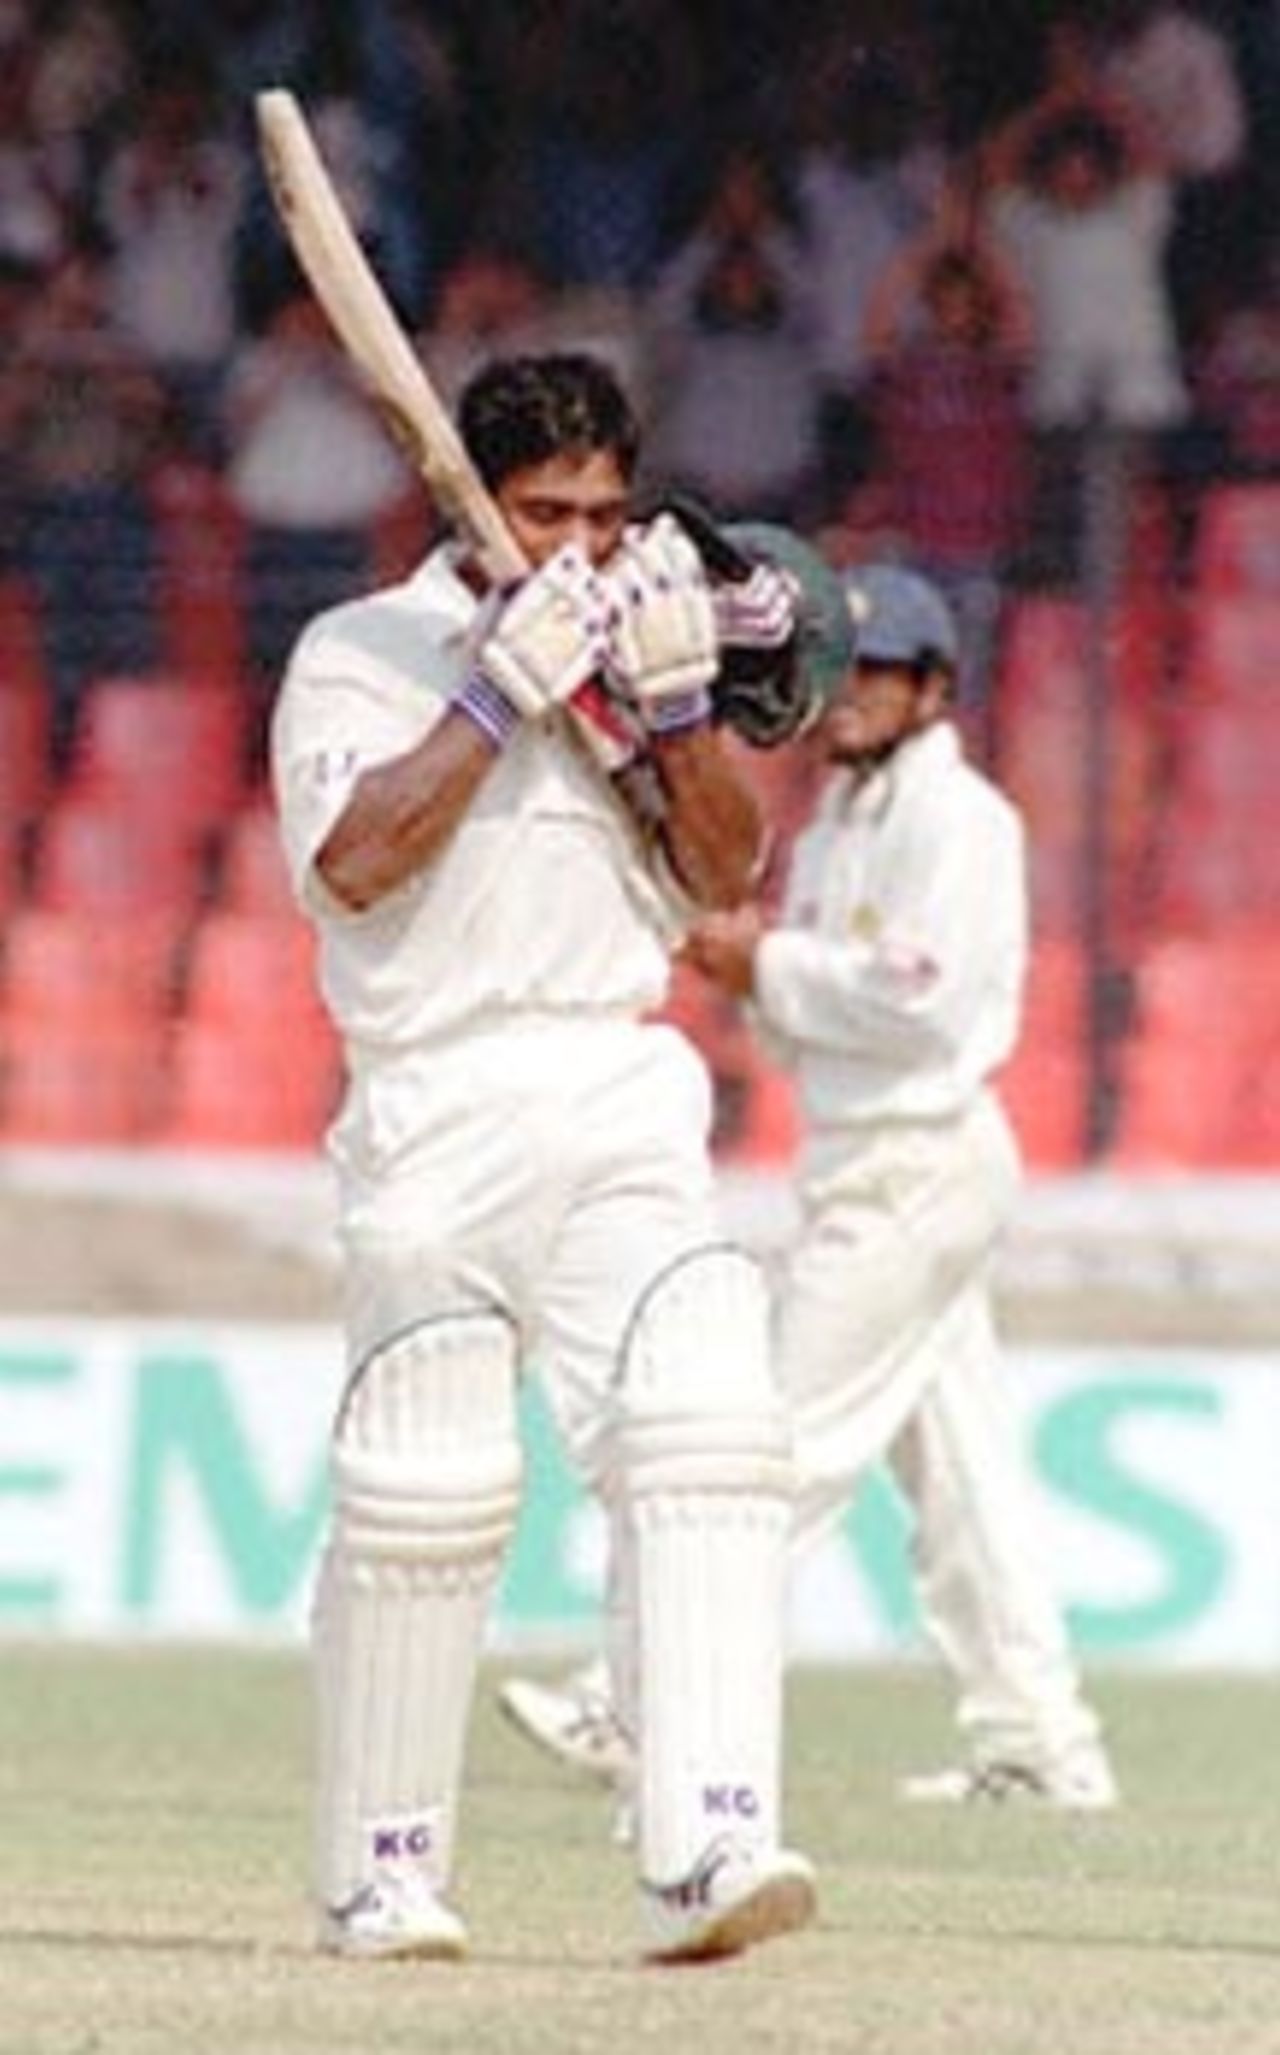 Bangladeshi batsman Aminul Islam raises his hands in prayers to thank Allah after he hit a century11 November 2000 at the Bangabandhu National Stadium on the second day of this South Asian country's inaugural Test match against India. Aminul created history by becoming the third man to score a century in an inaugural Test match. Bangladesh scored 302 for six at lunch on the day in their debut match.